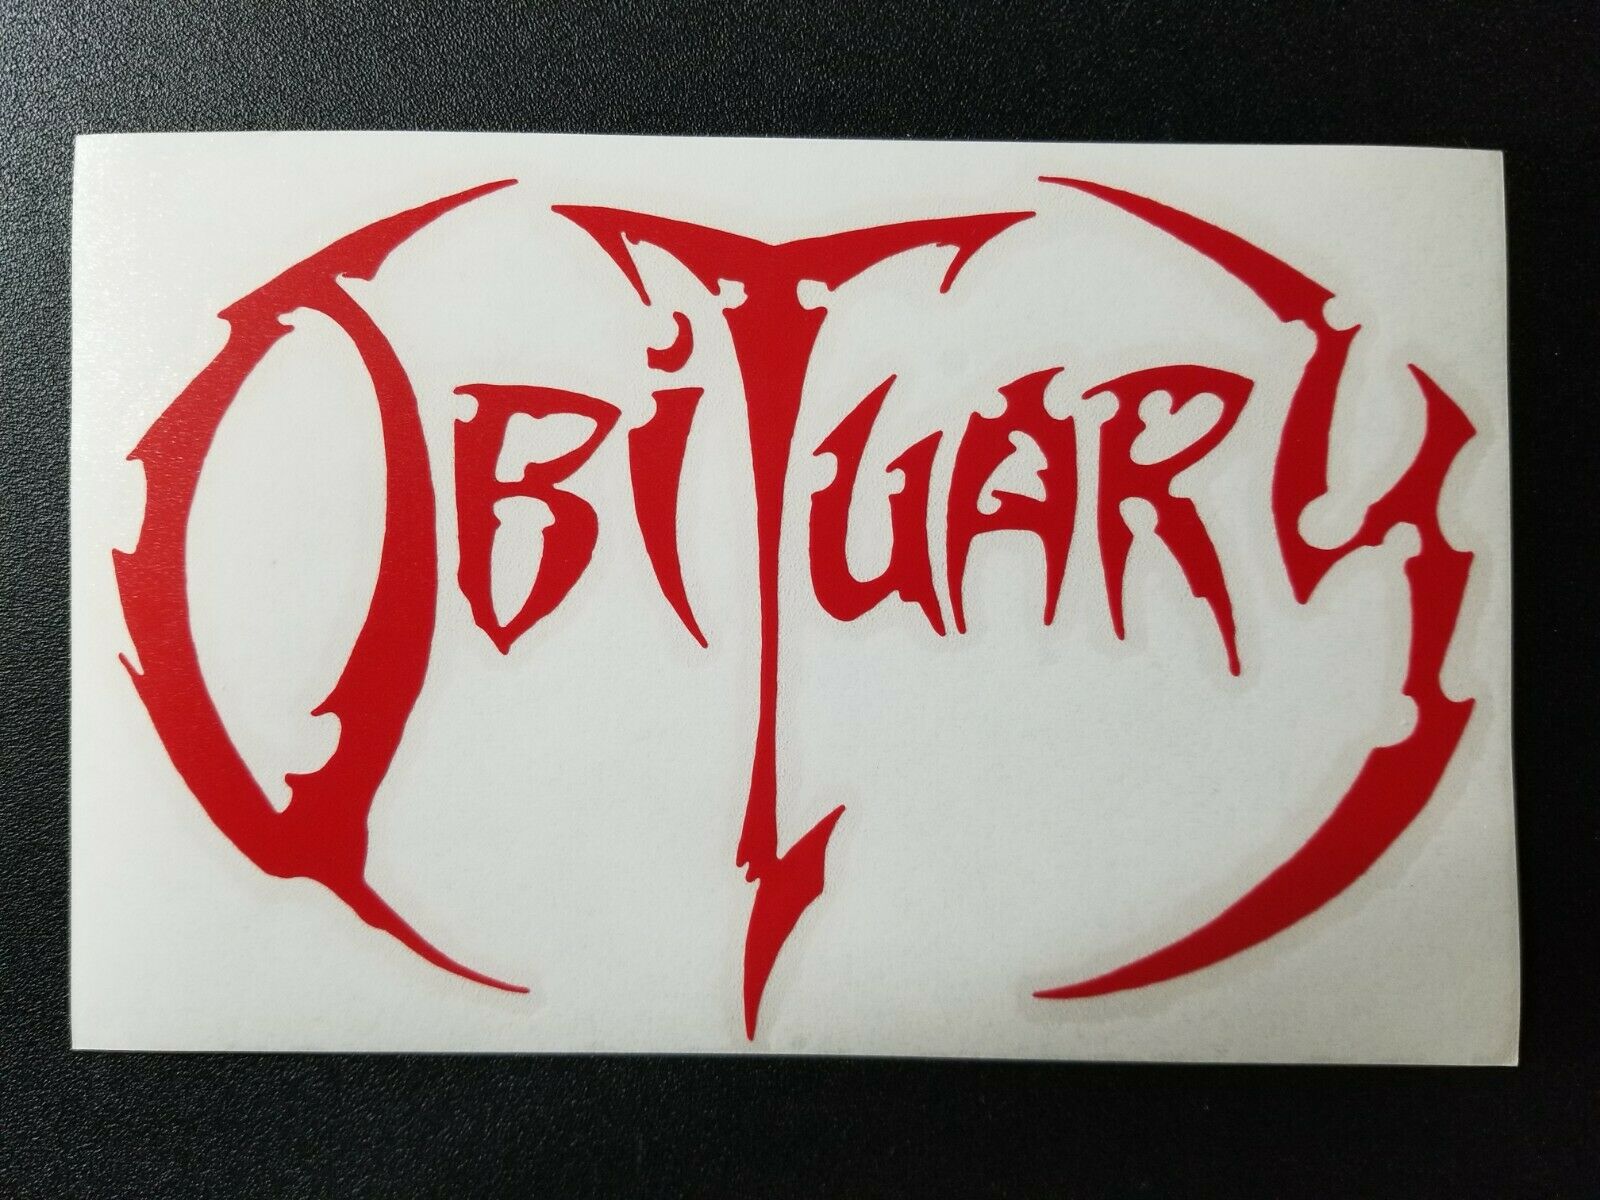 Obituary Band Logo Window Sticker Red 7” X 4 ½” Vinyl Car Decal Slowly Cause End